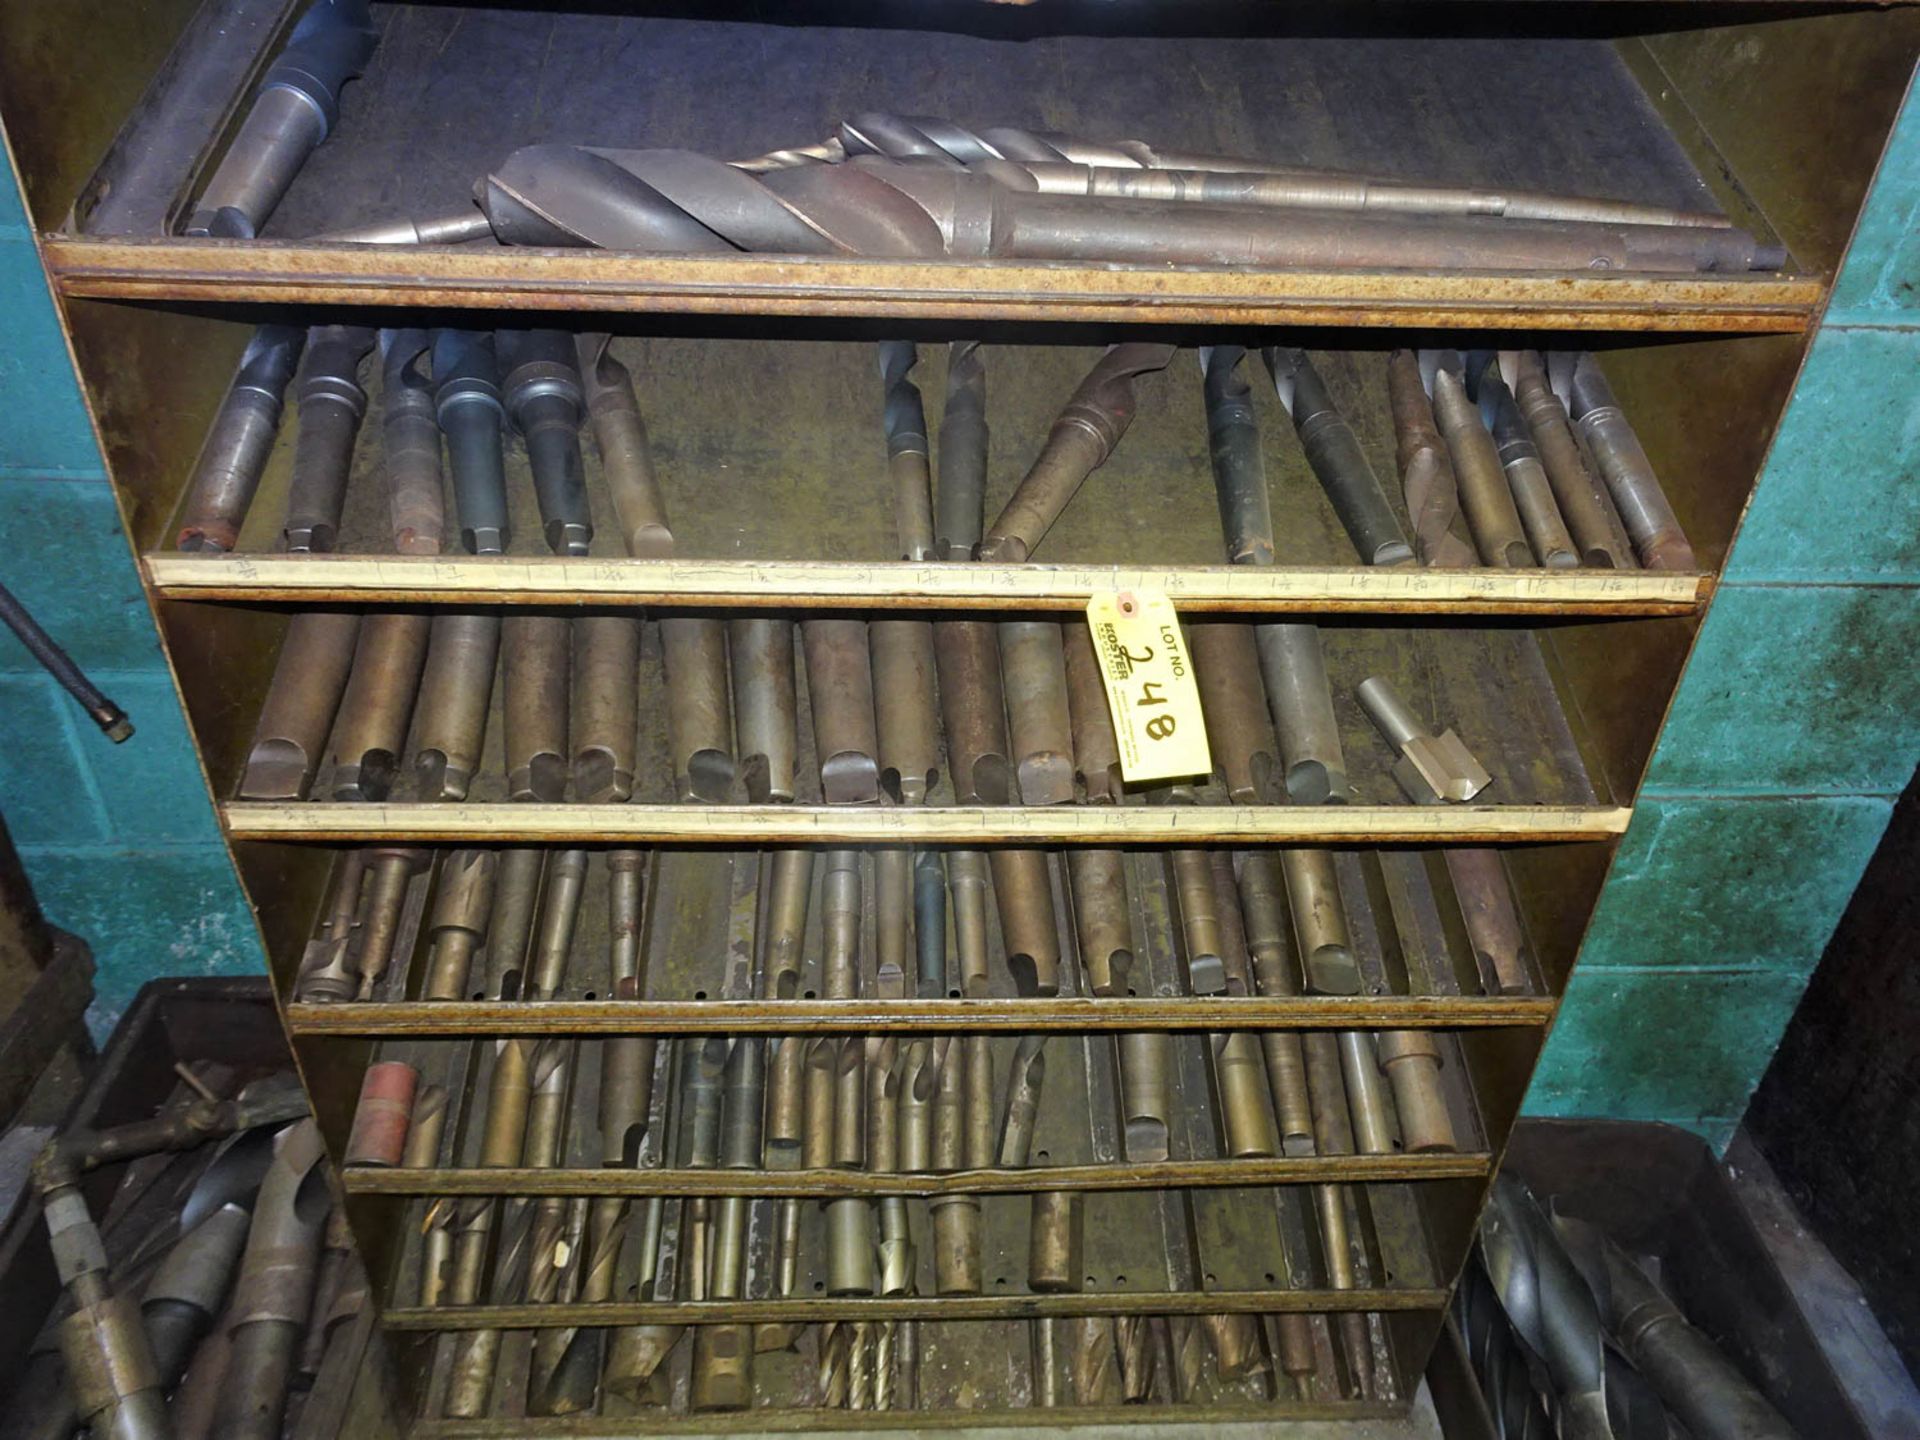 LOT OF LARGE DRILL BITS WITH RACK AND METAL BINS - Image 2 of 2